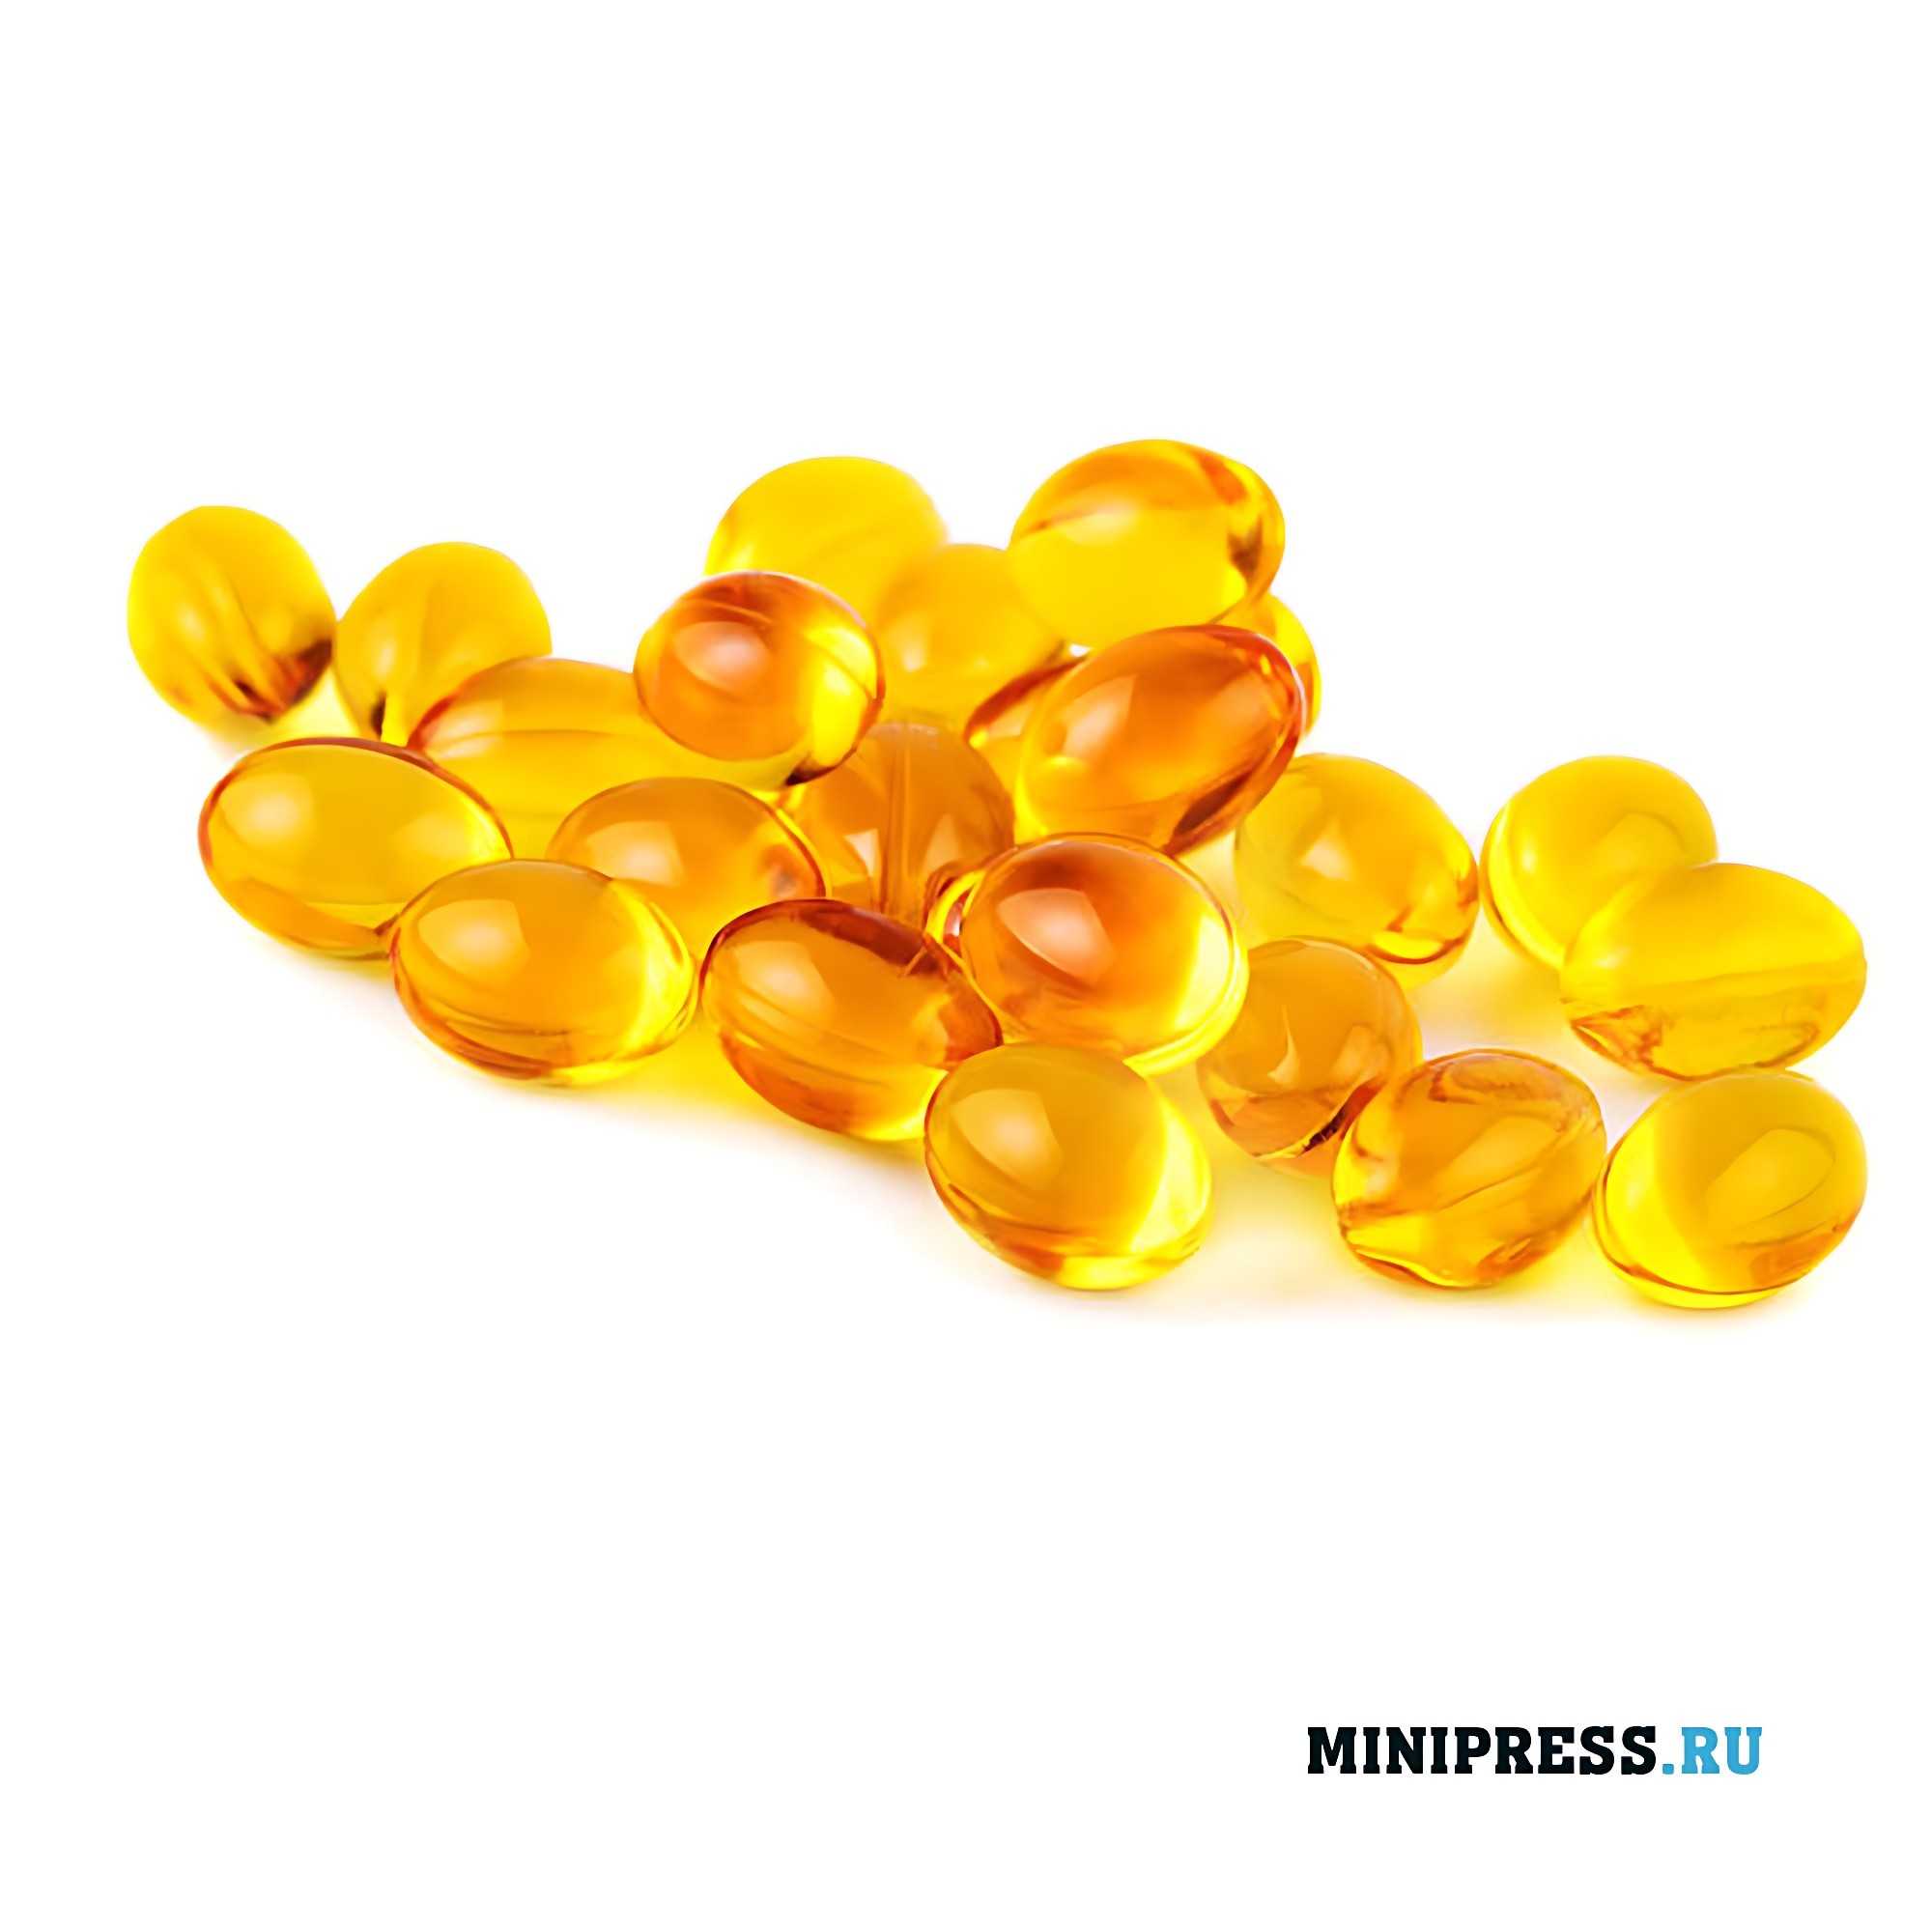 Soft gelatin capsules for oil and fat